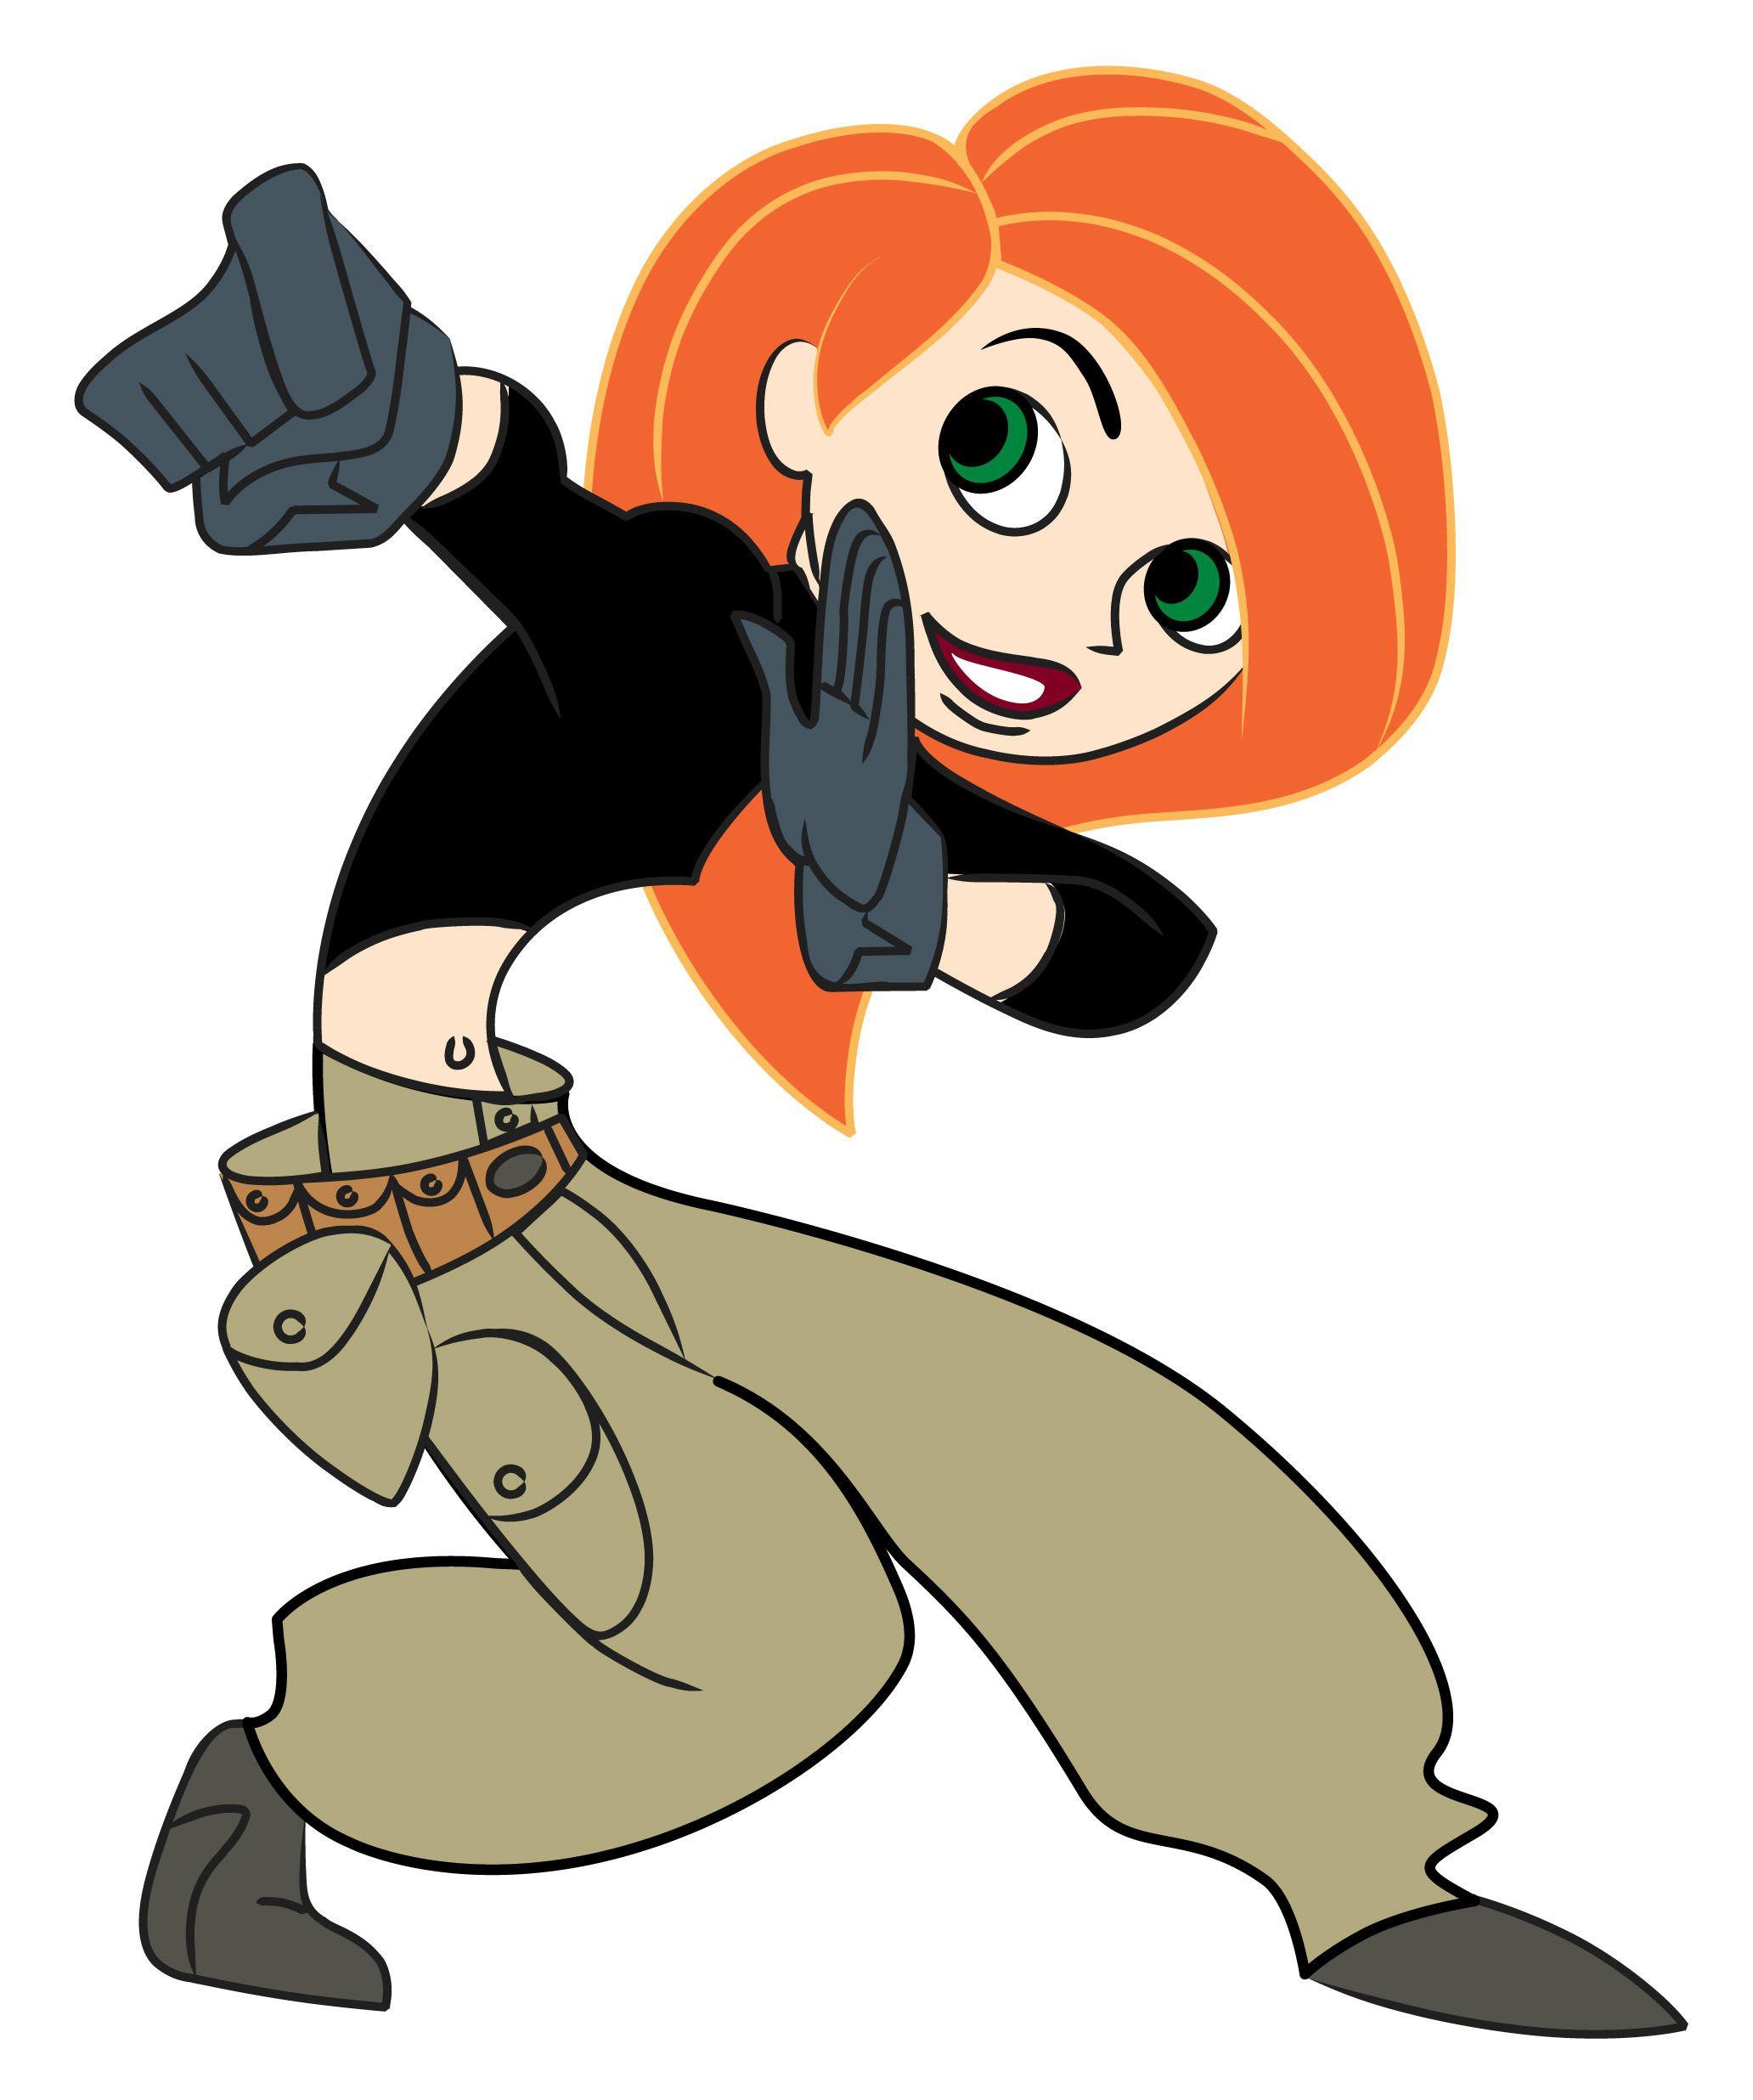 Kim Possible screenshots, image and pictures